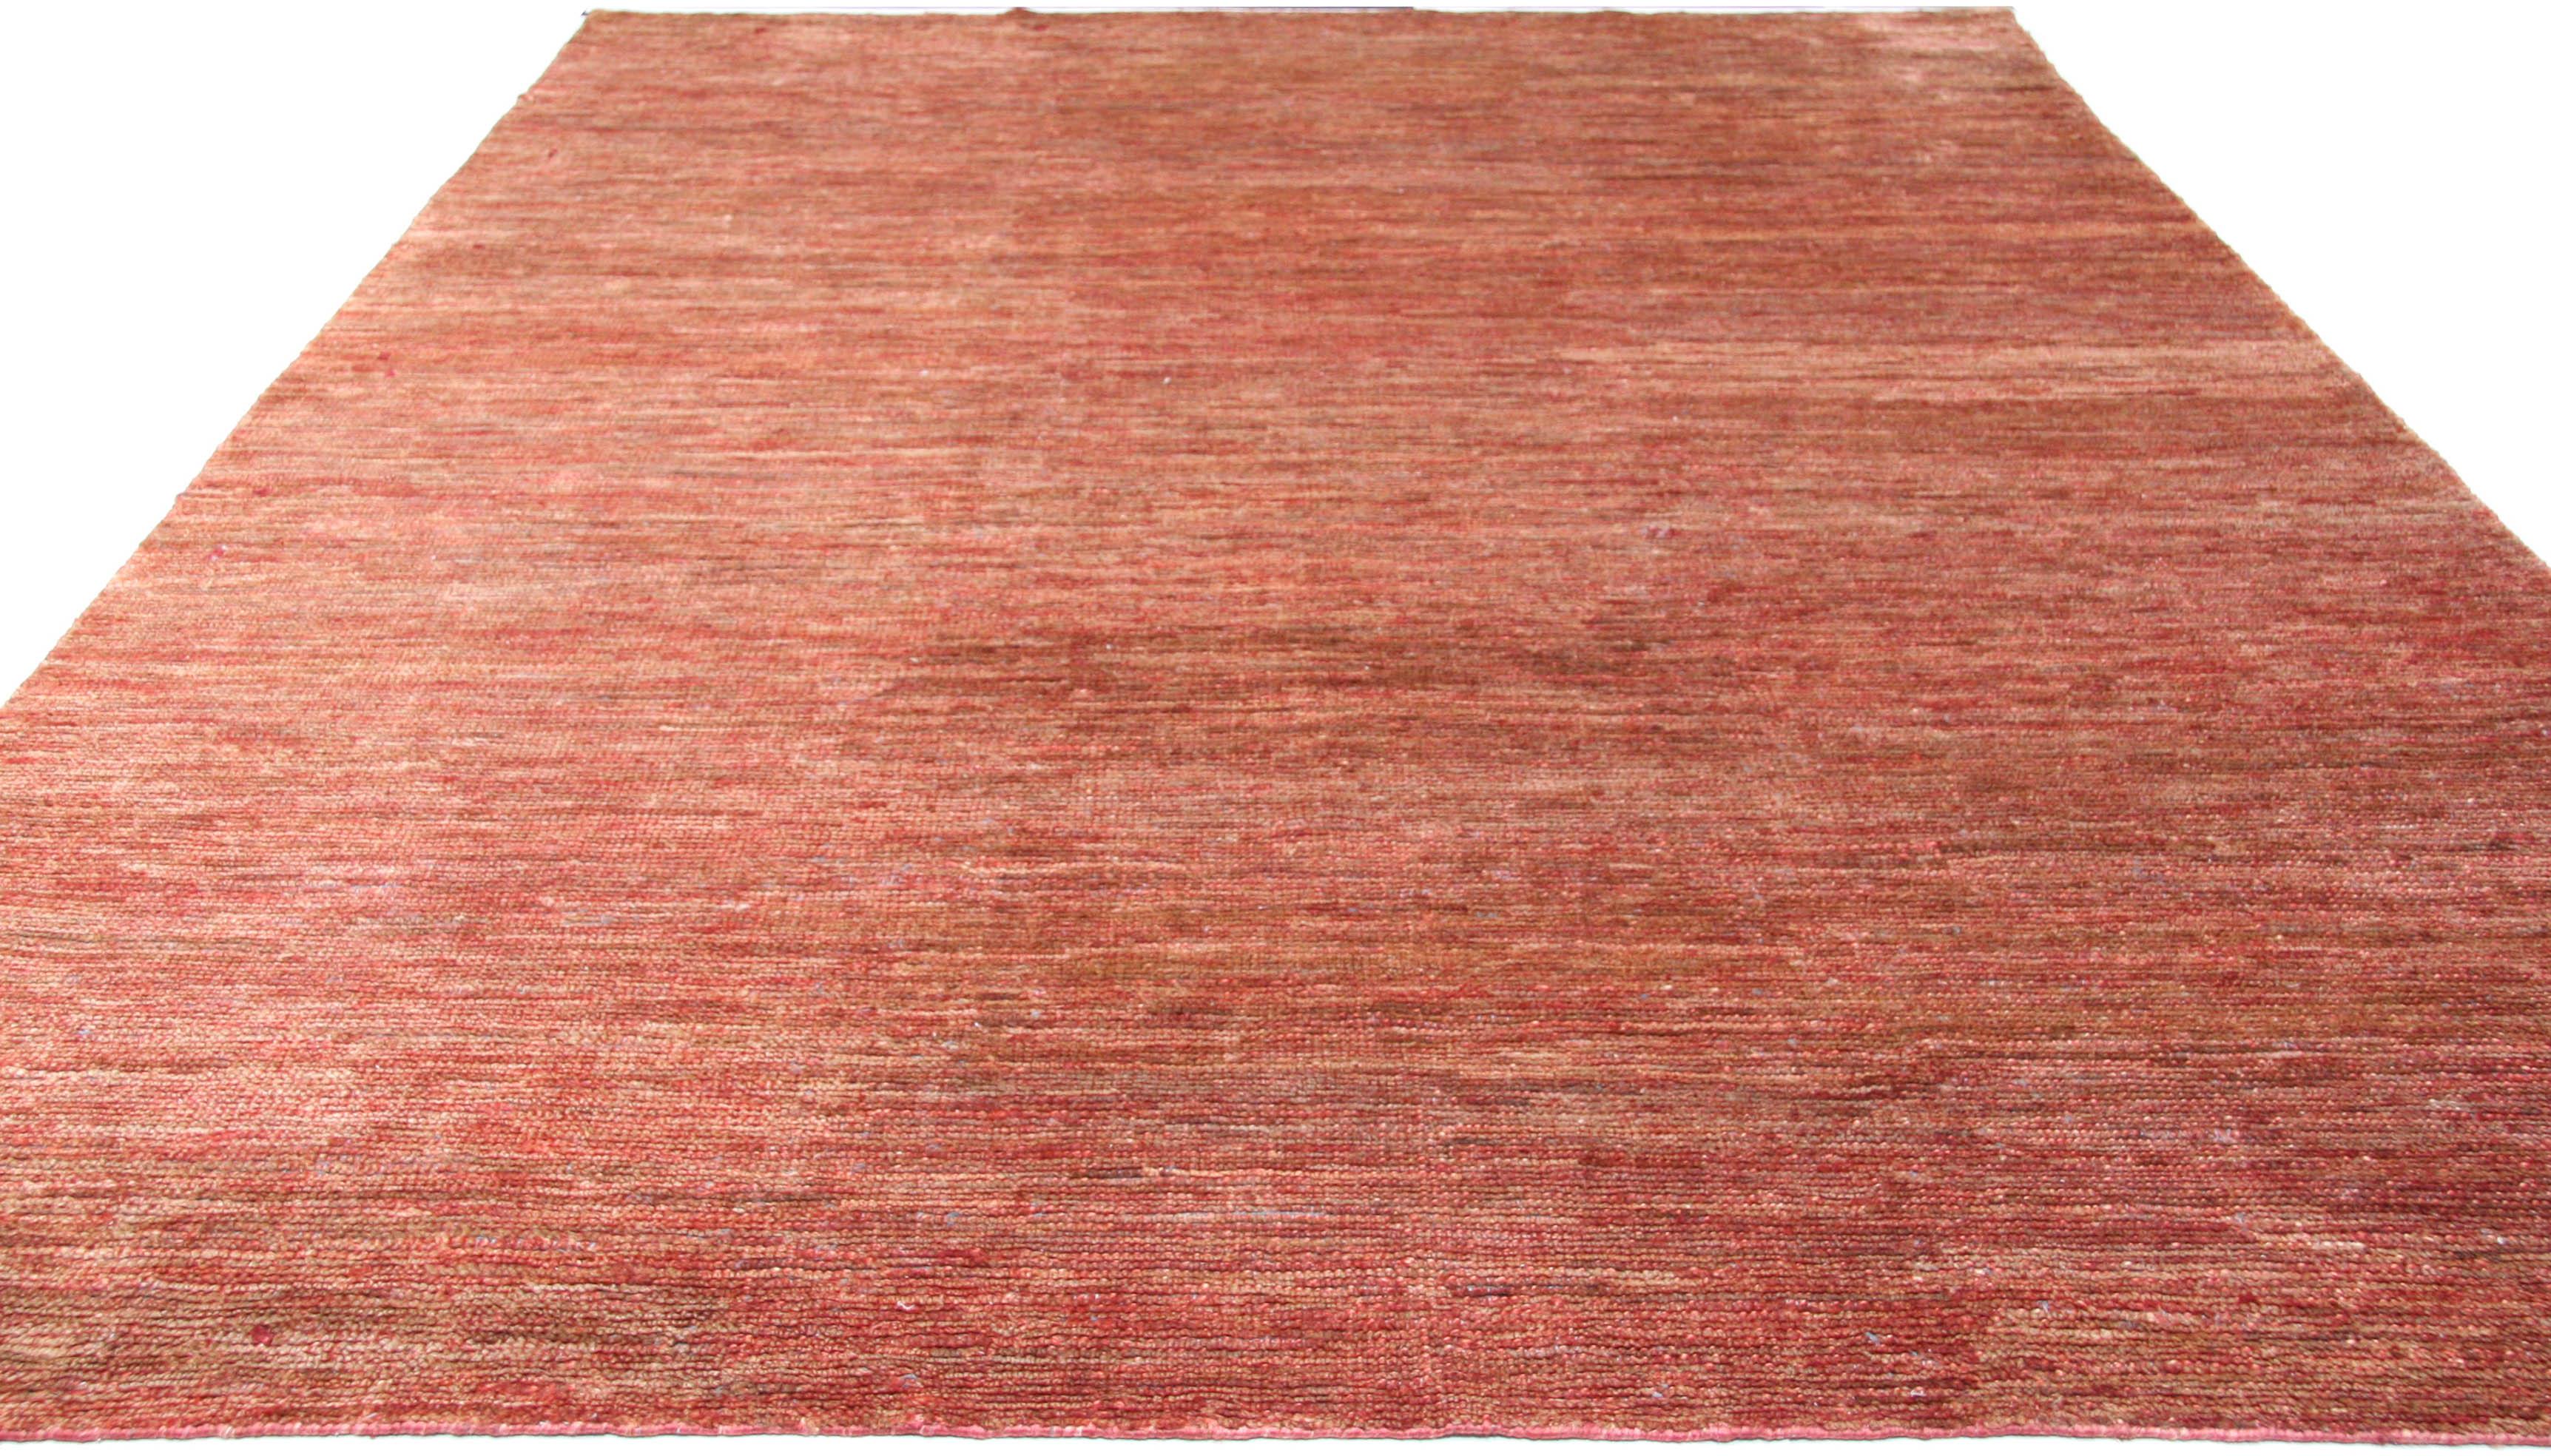 A closer look at this natural jute rug reveals a surprising range of red, brown, cream and other warm tones. Powerful but not distracting. Wonderfully soft and best suited for low to medium traffic areas. 

Hand knotted in India. Made using